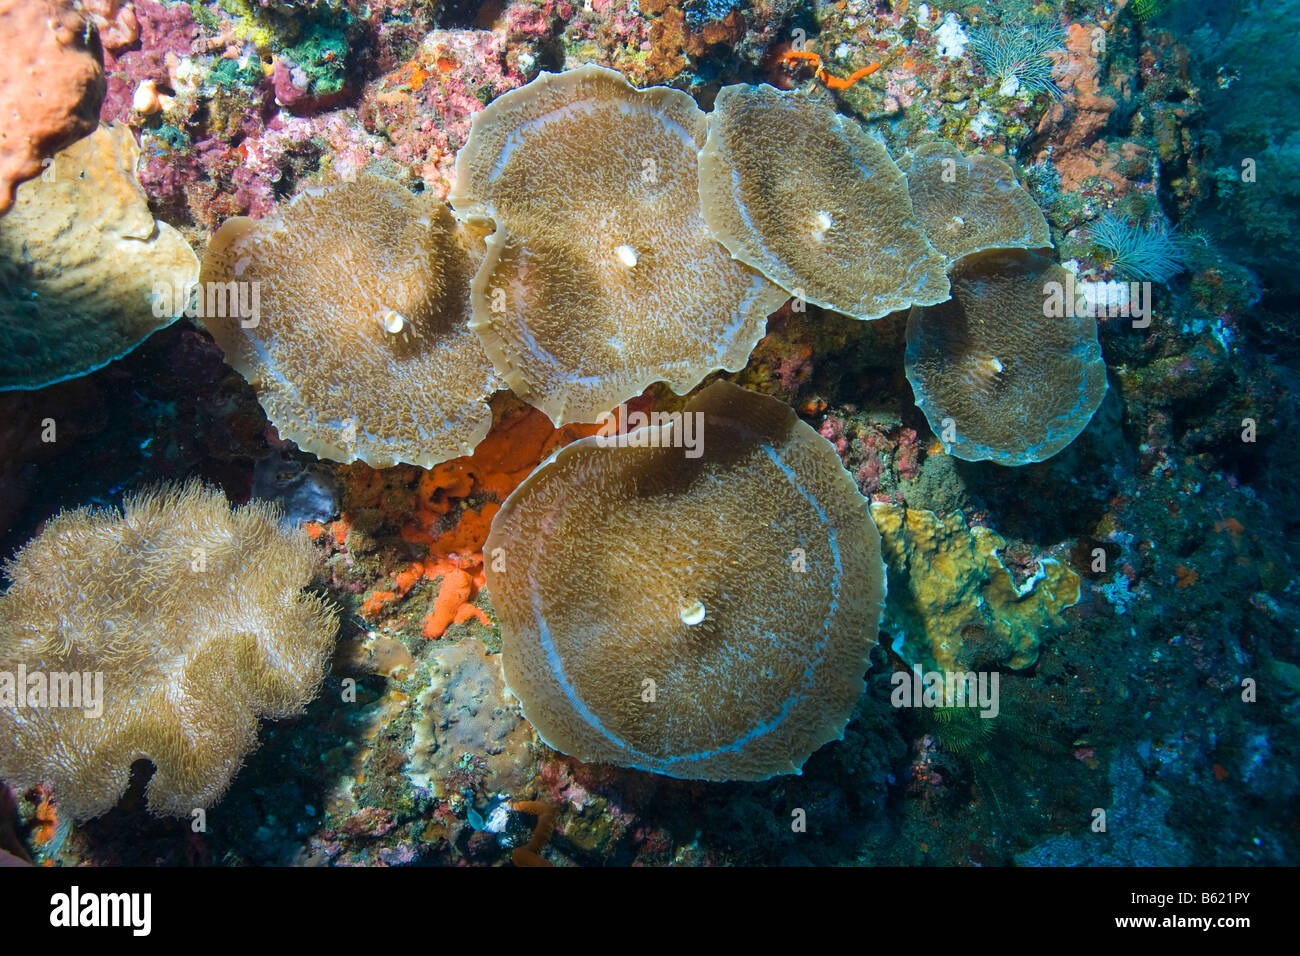 Giant Cup Mushroom Coral or Giant Coral Anemone (Amplexidiscus fenestrafer), Indonesia, Southeast Asia Stock Photo